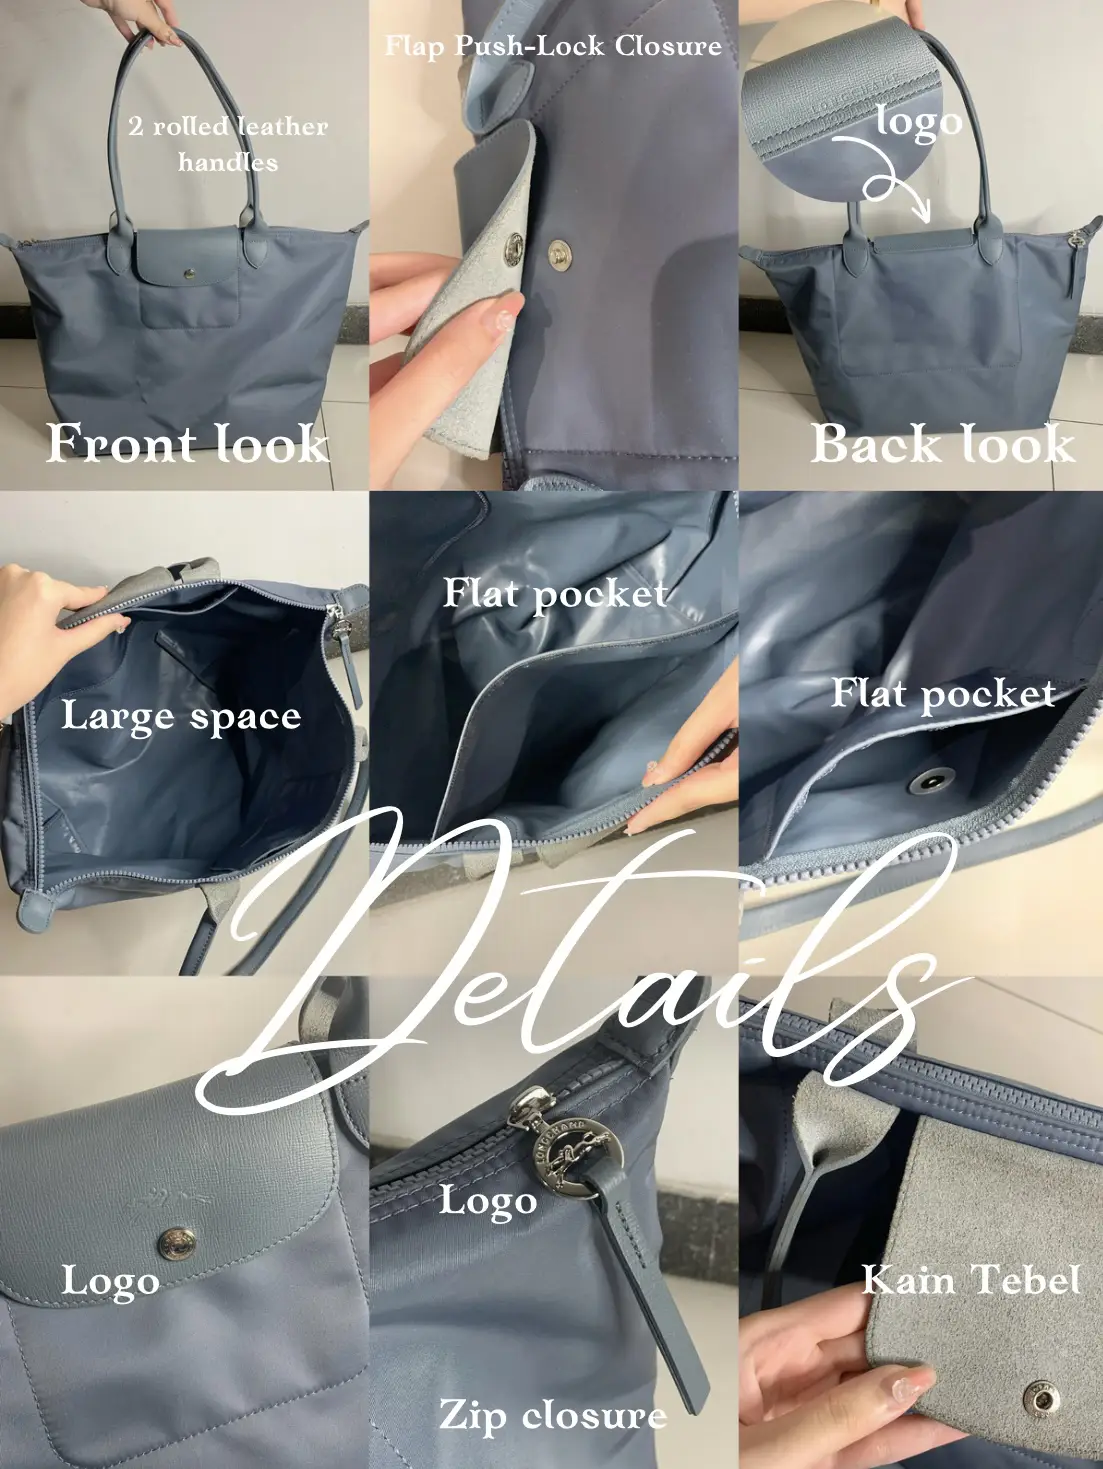 Longchamp Cosmetic Case Review + 21 Things I Constantly Keep